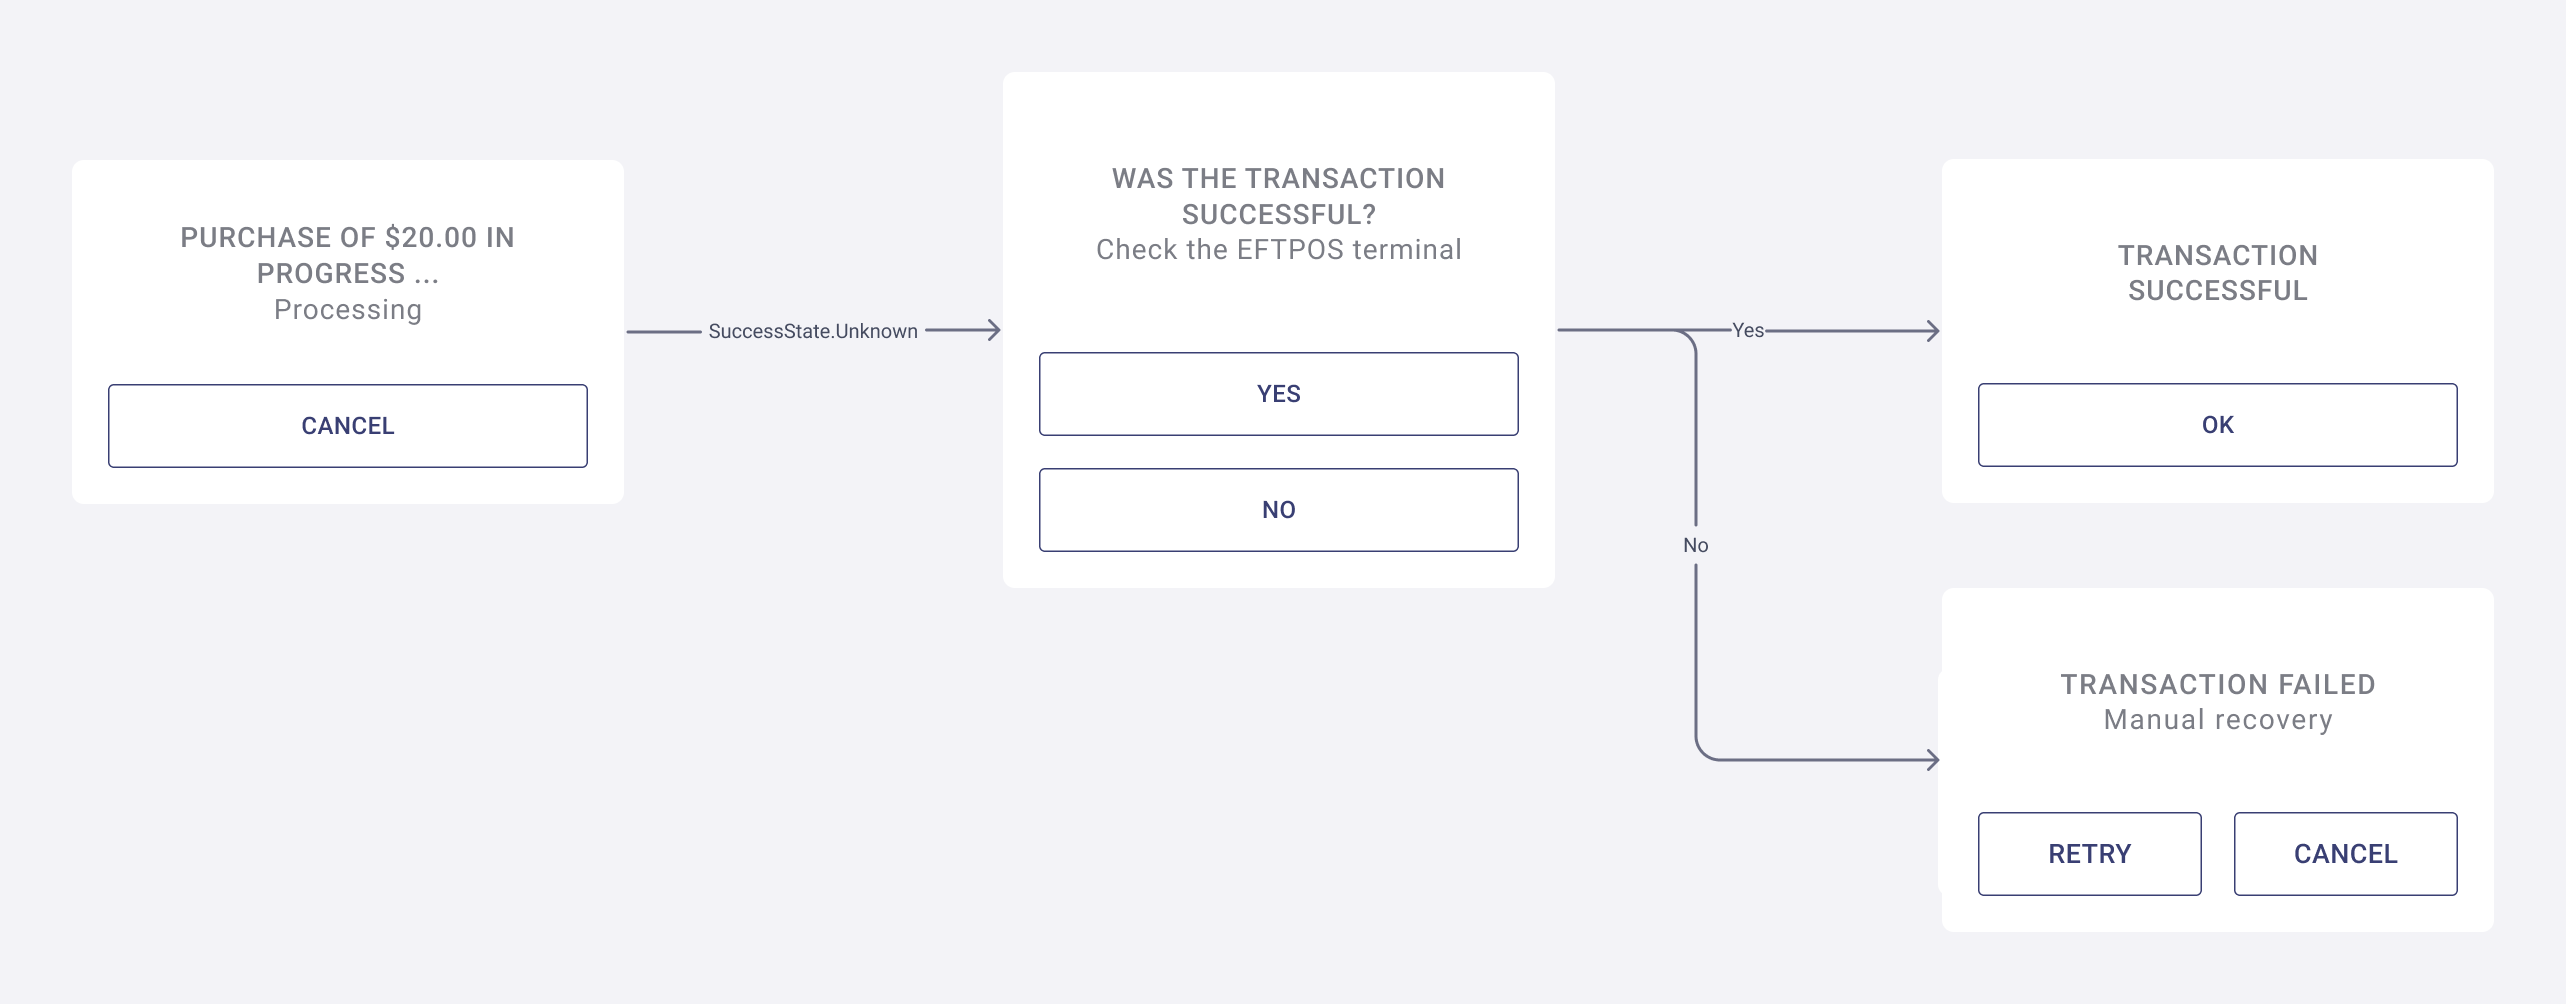 A flow diagram of the UI screens needed for transaction recovery.